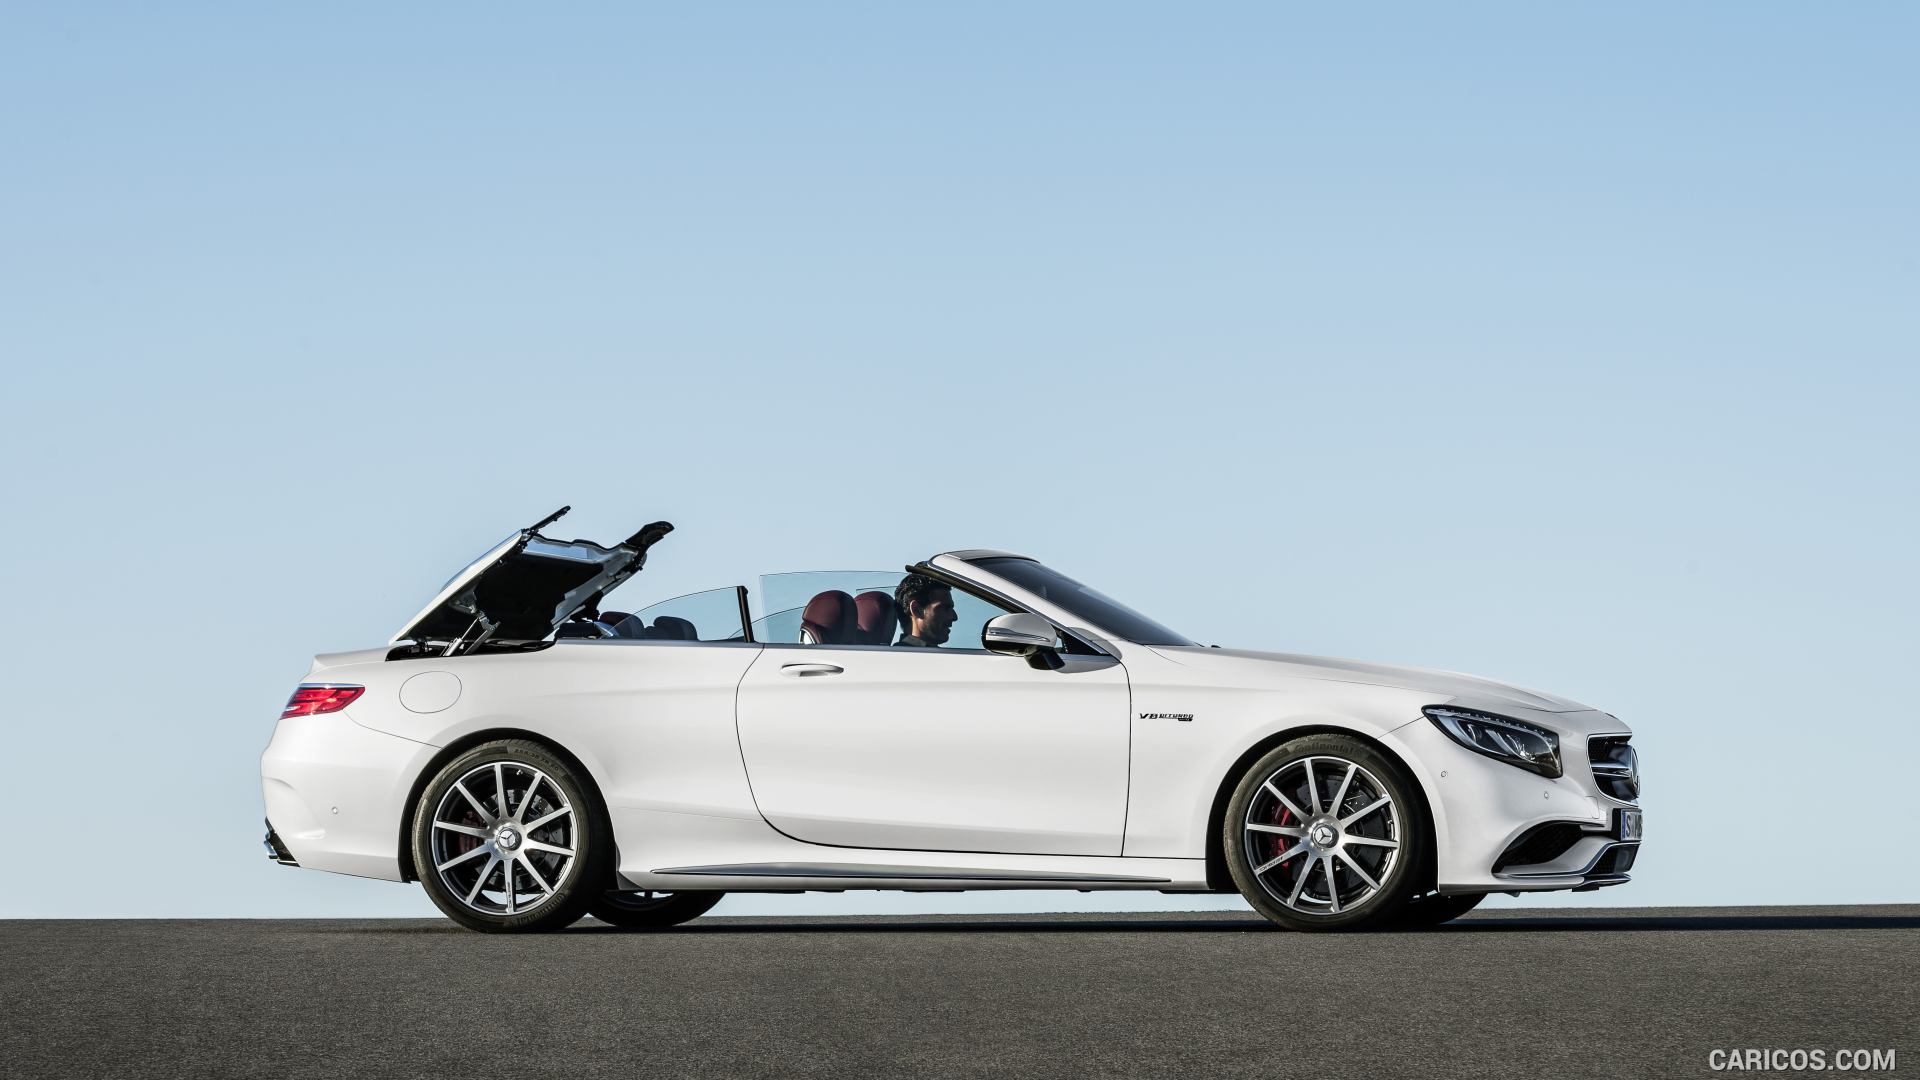 2017 Mercedes-AMG S63 4MATIC Cabriolet (Designo Diamond White Bright) - Top In Action, #16 of 65